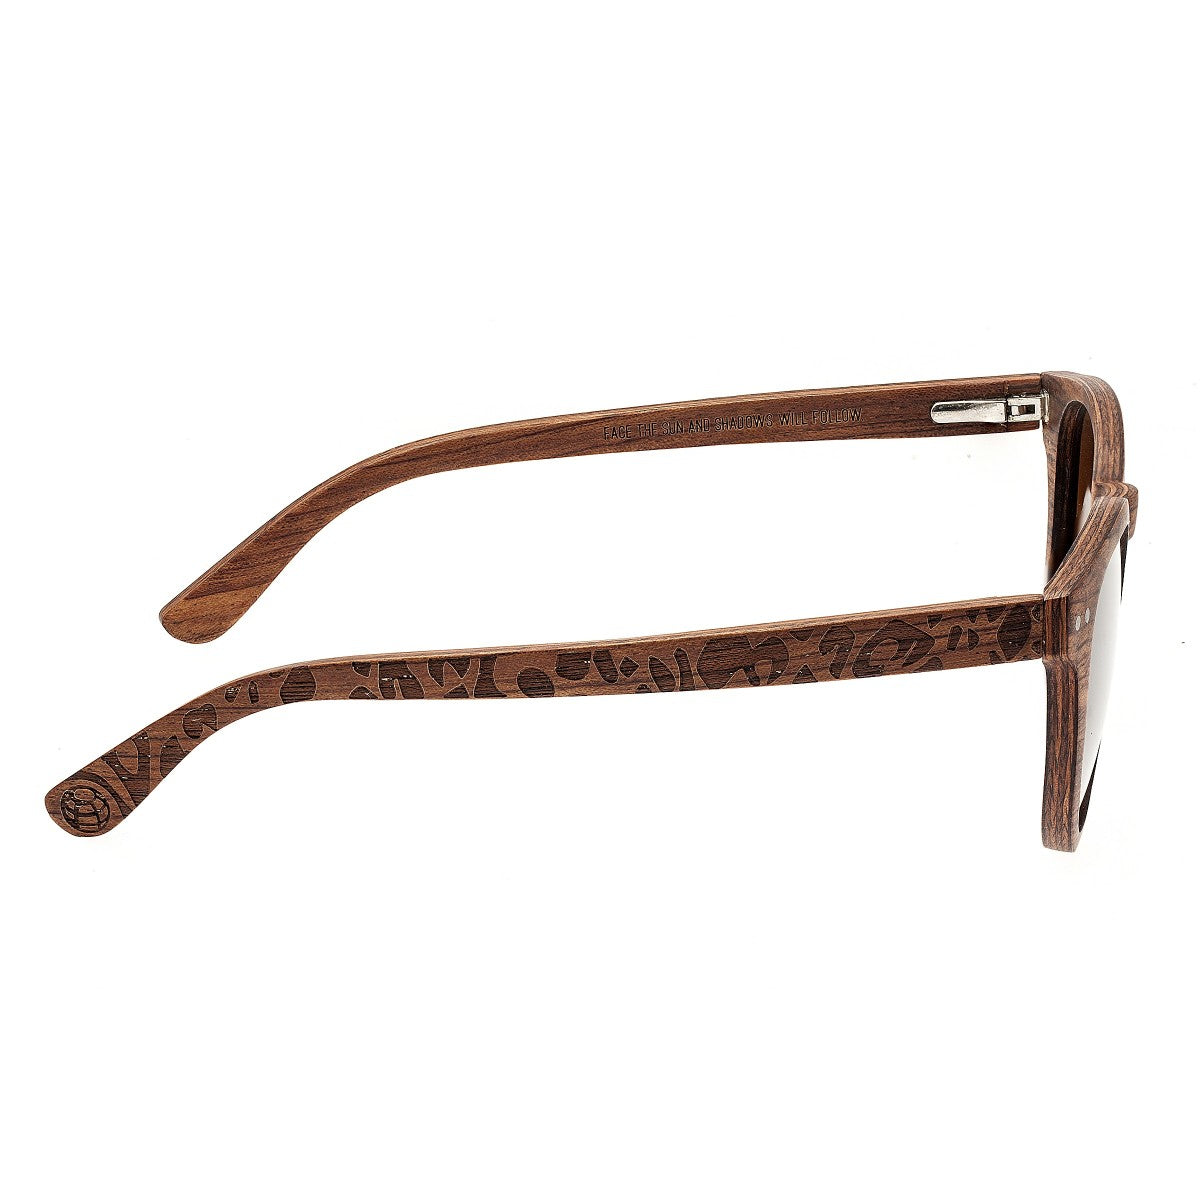 Earth Wood Copacabana Polarized Sunglasses - Red Rosewood/Brown - ESG020R